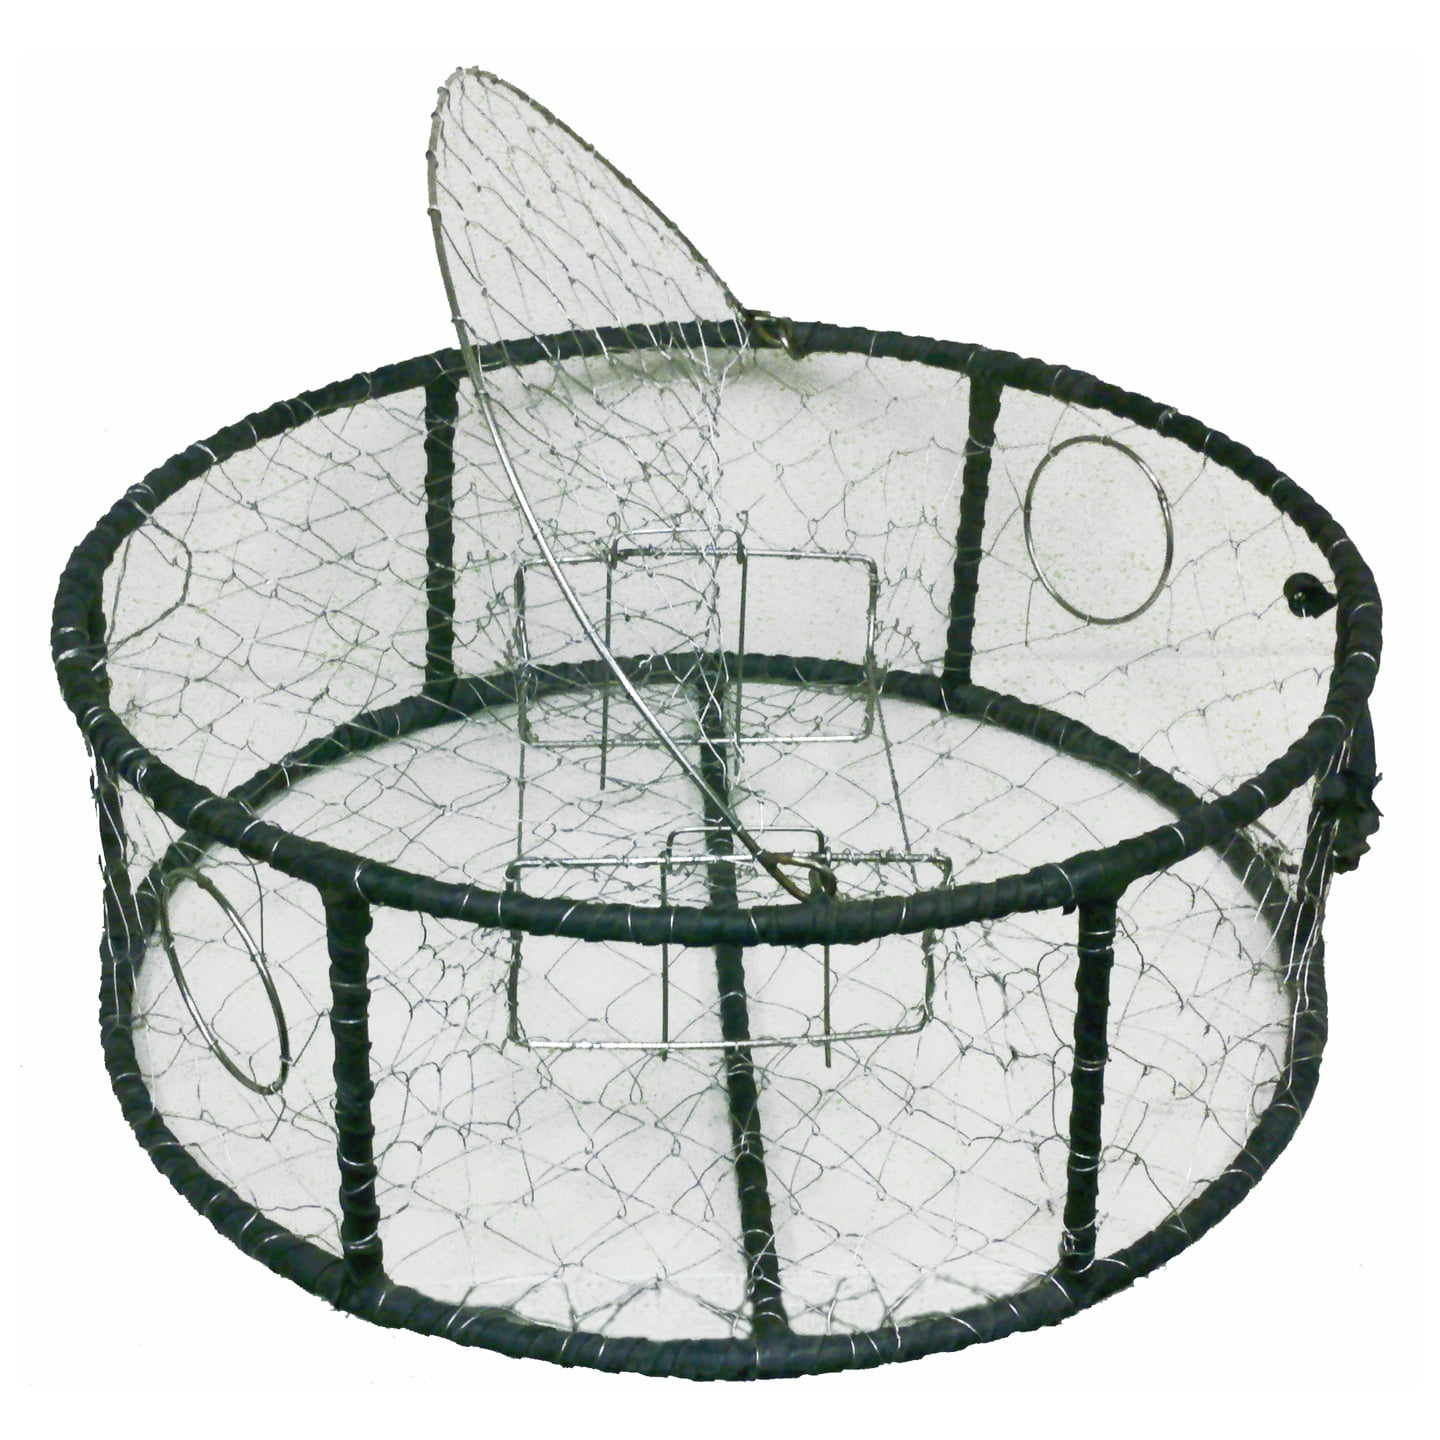 Fish Baskets Steel Wire Crab Fishing Traps for Saltwater Seawater